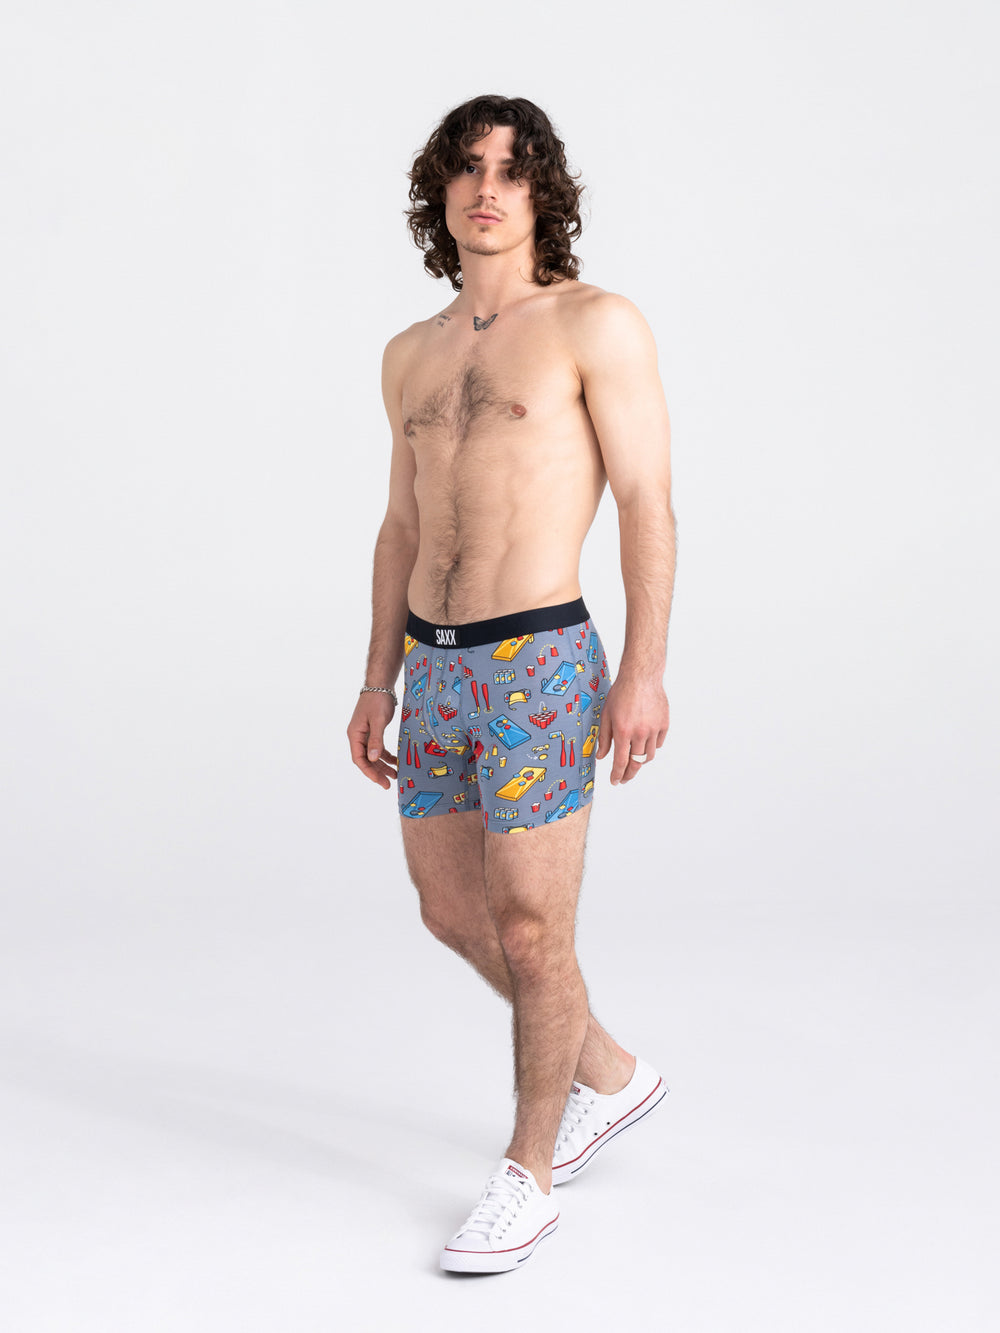 SAXX VIBE BOXER BRIEF- BEER OLYMPICS GRIS